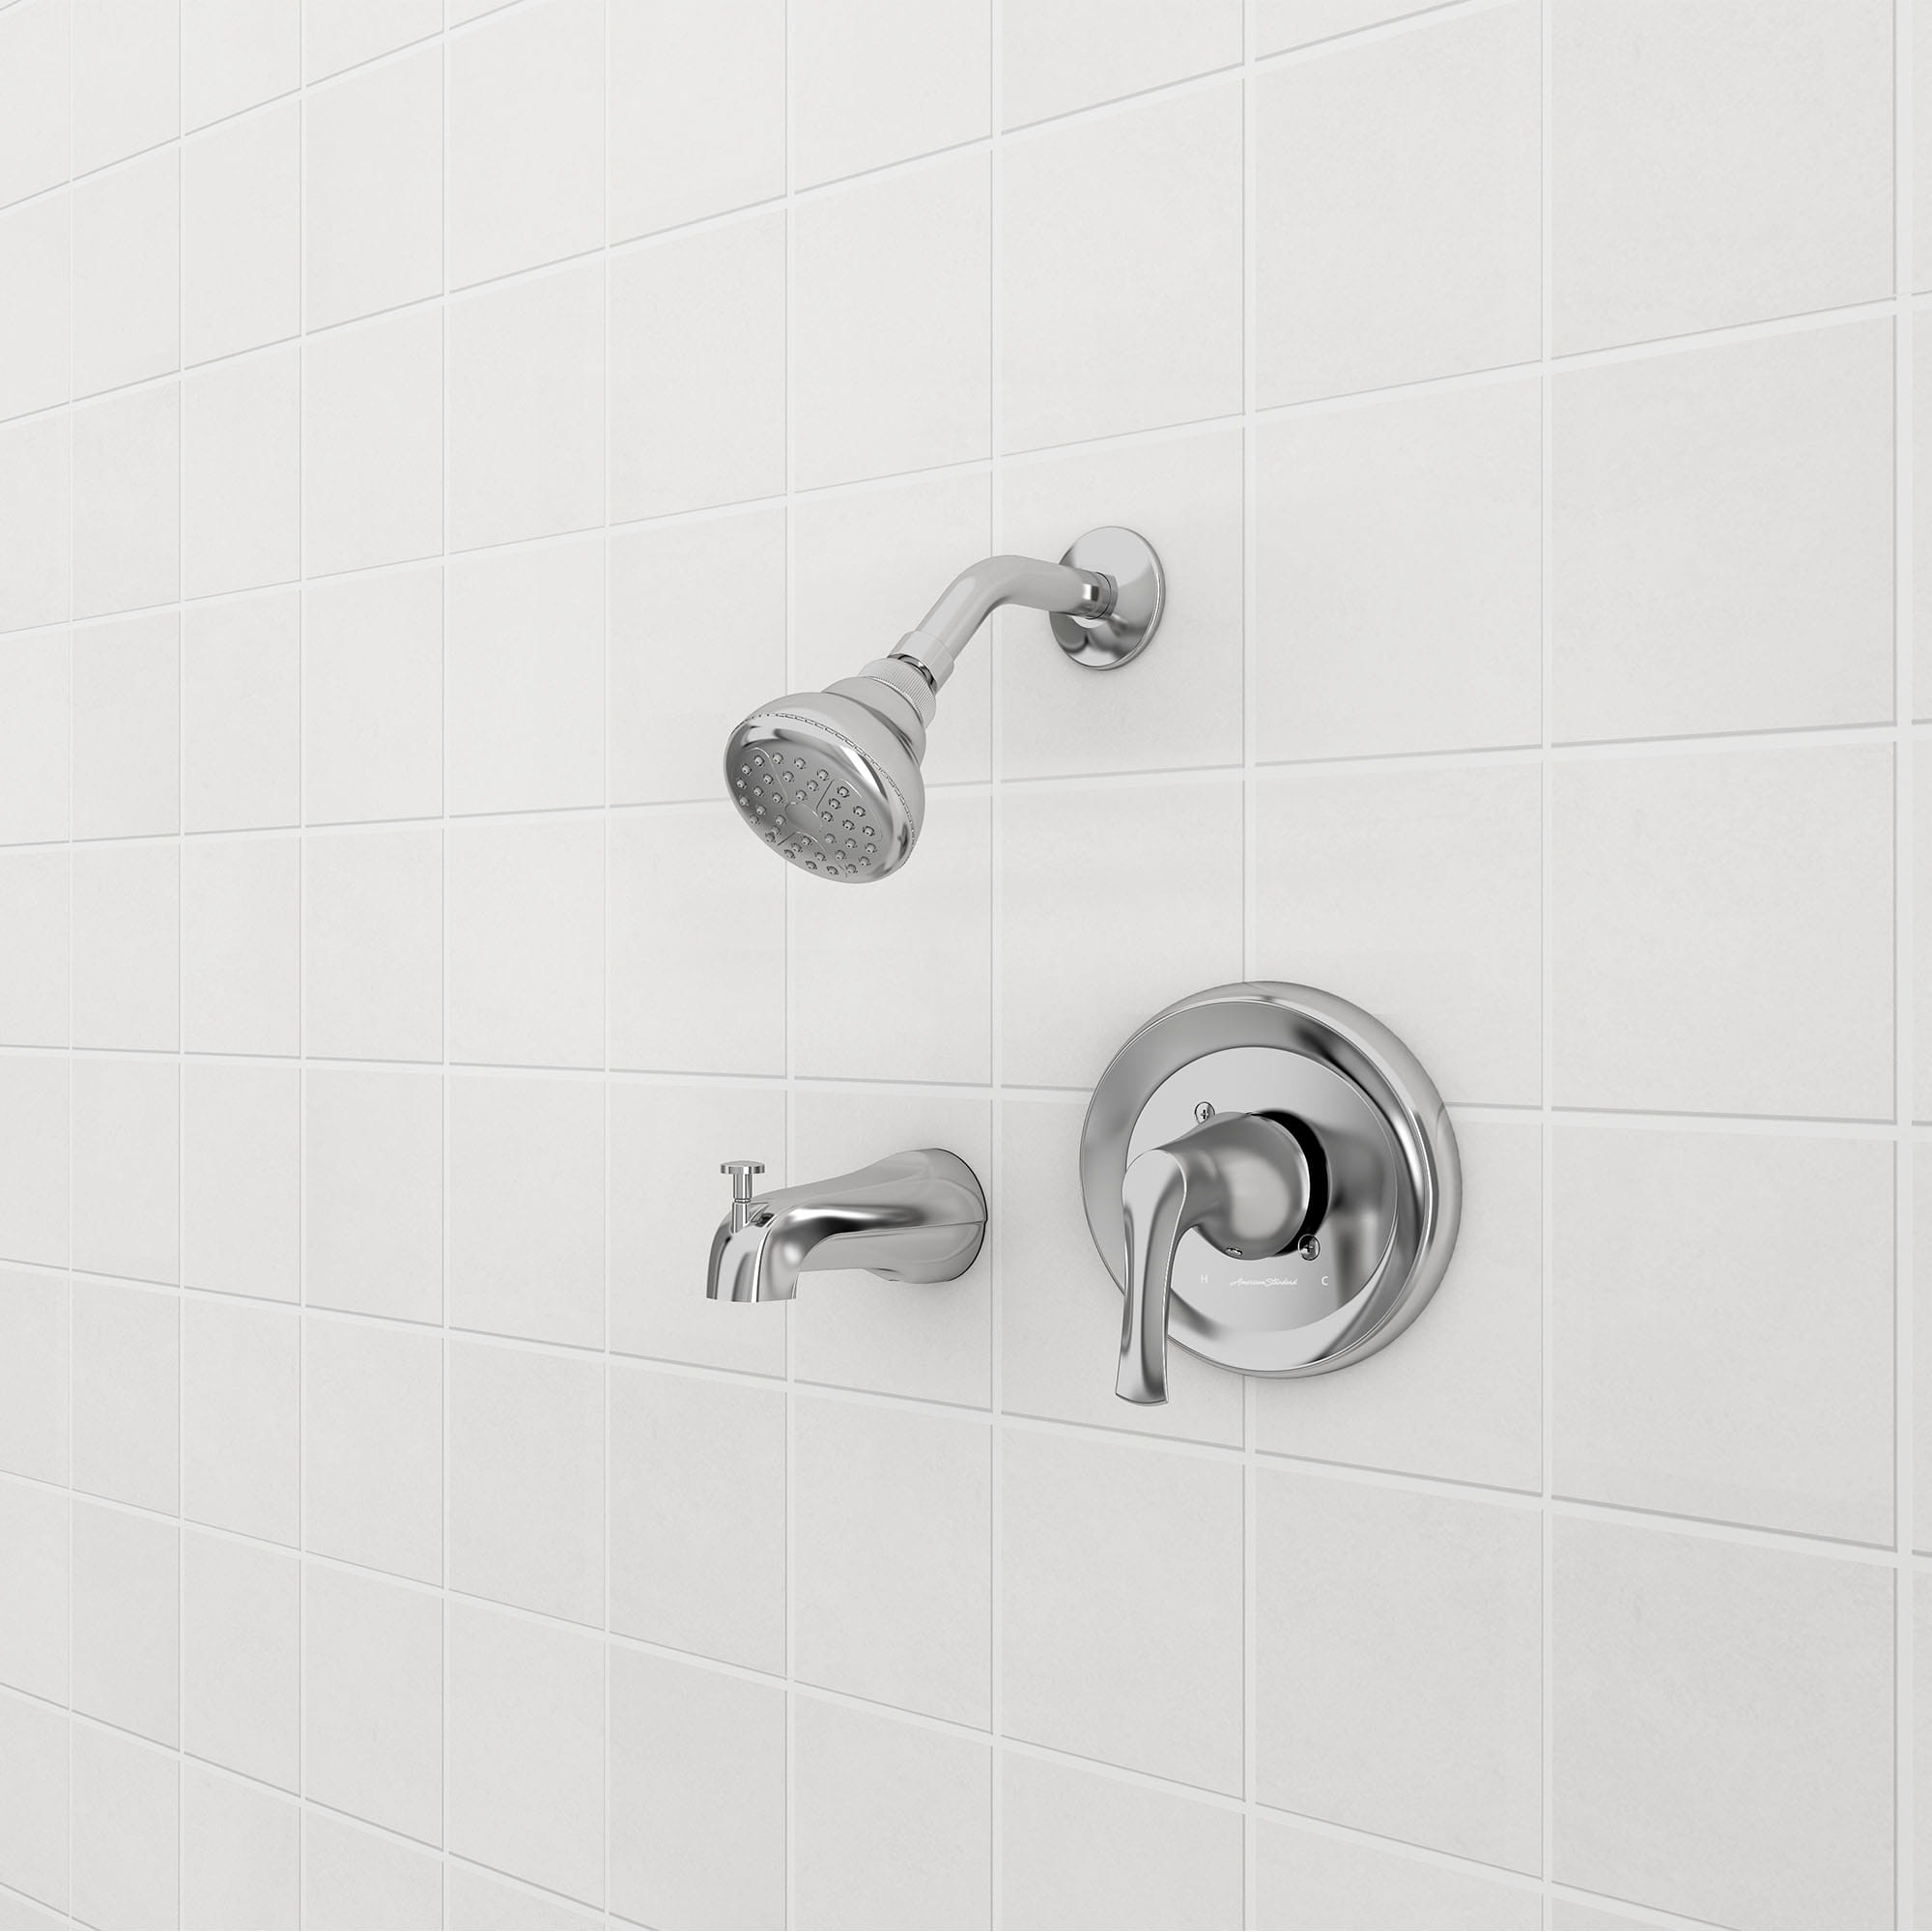 Bedminster Tub and Shower Trim Kit with Valve CHROME